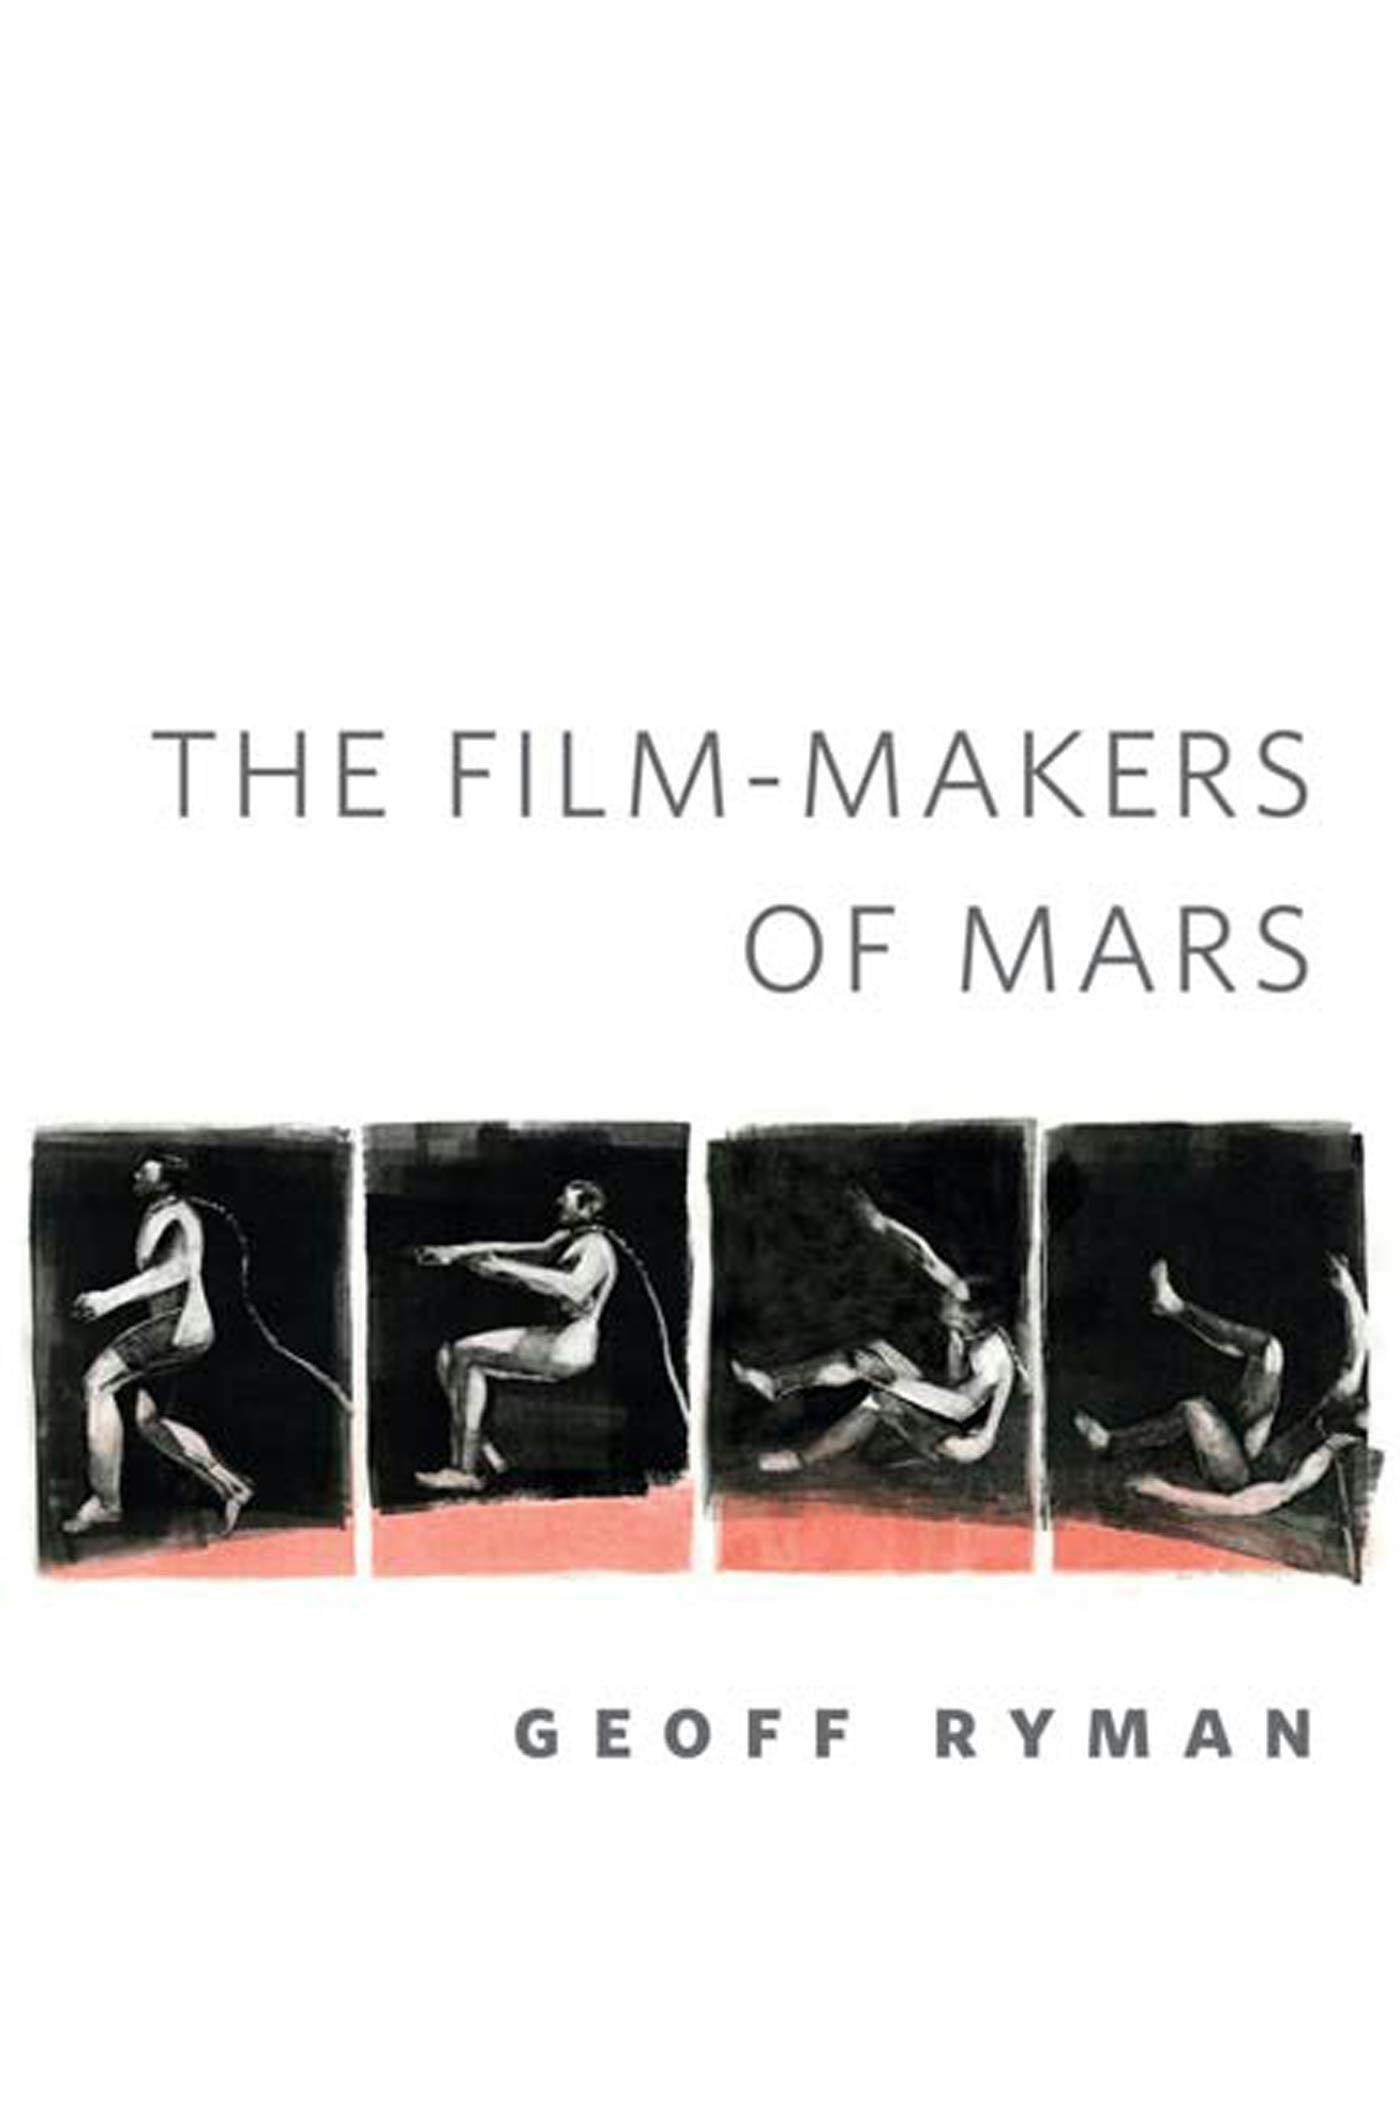 Image of The Film-makers of Mars